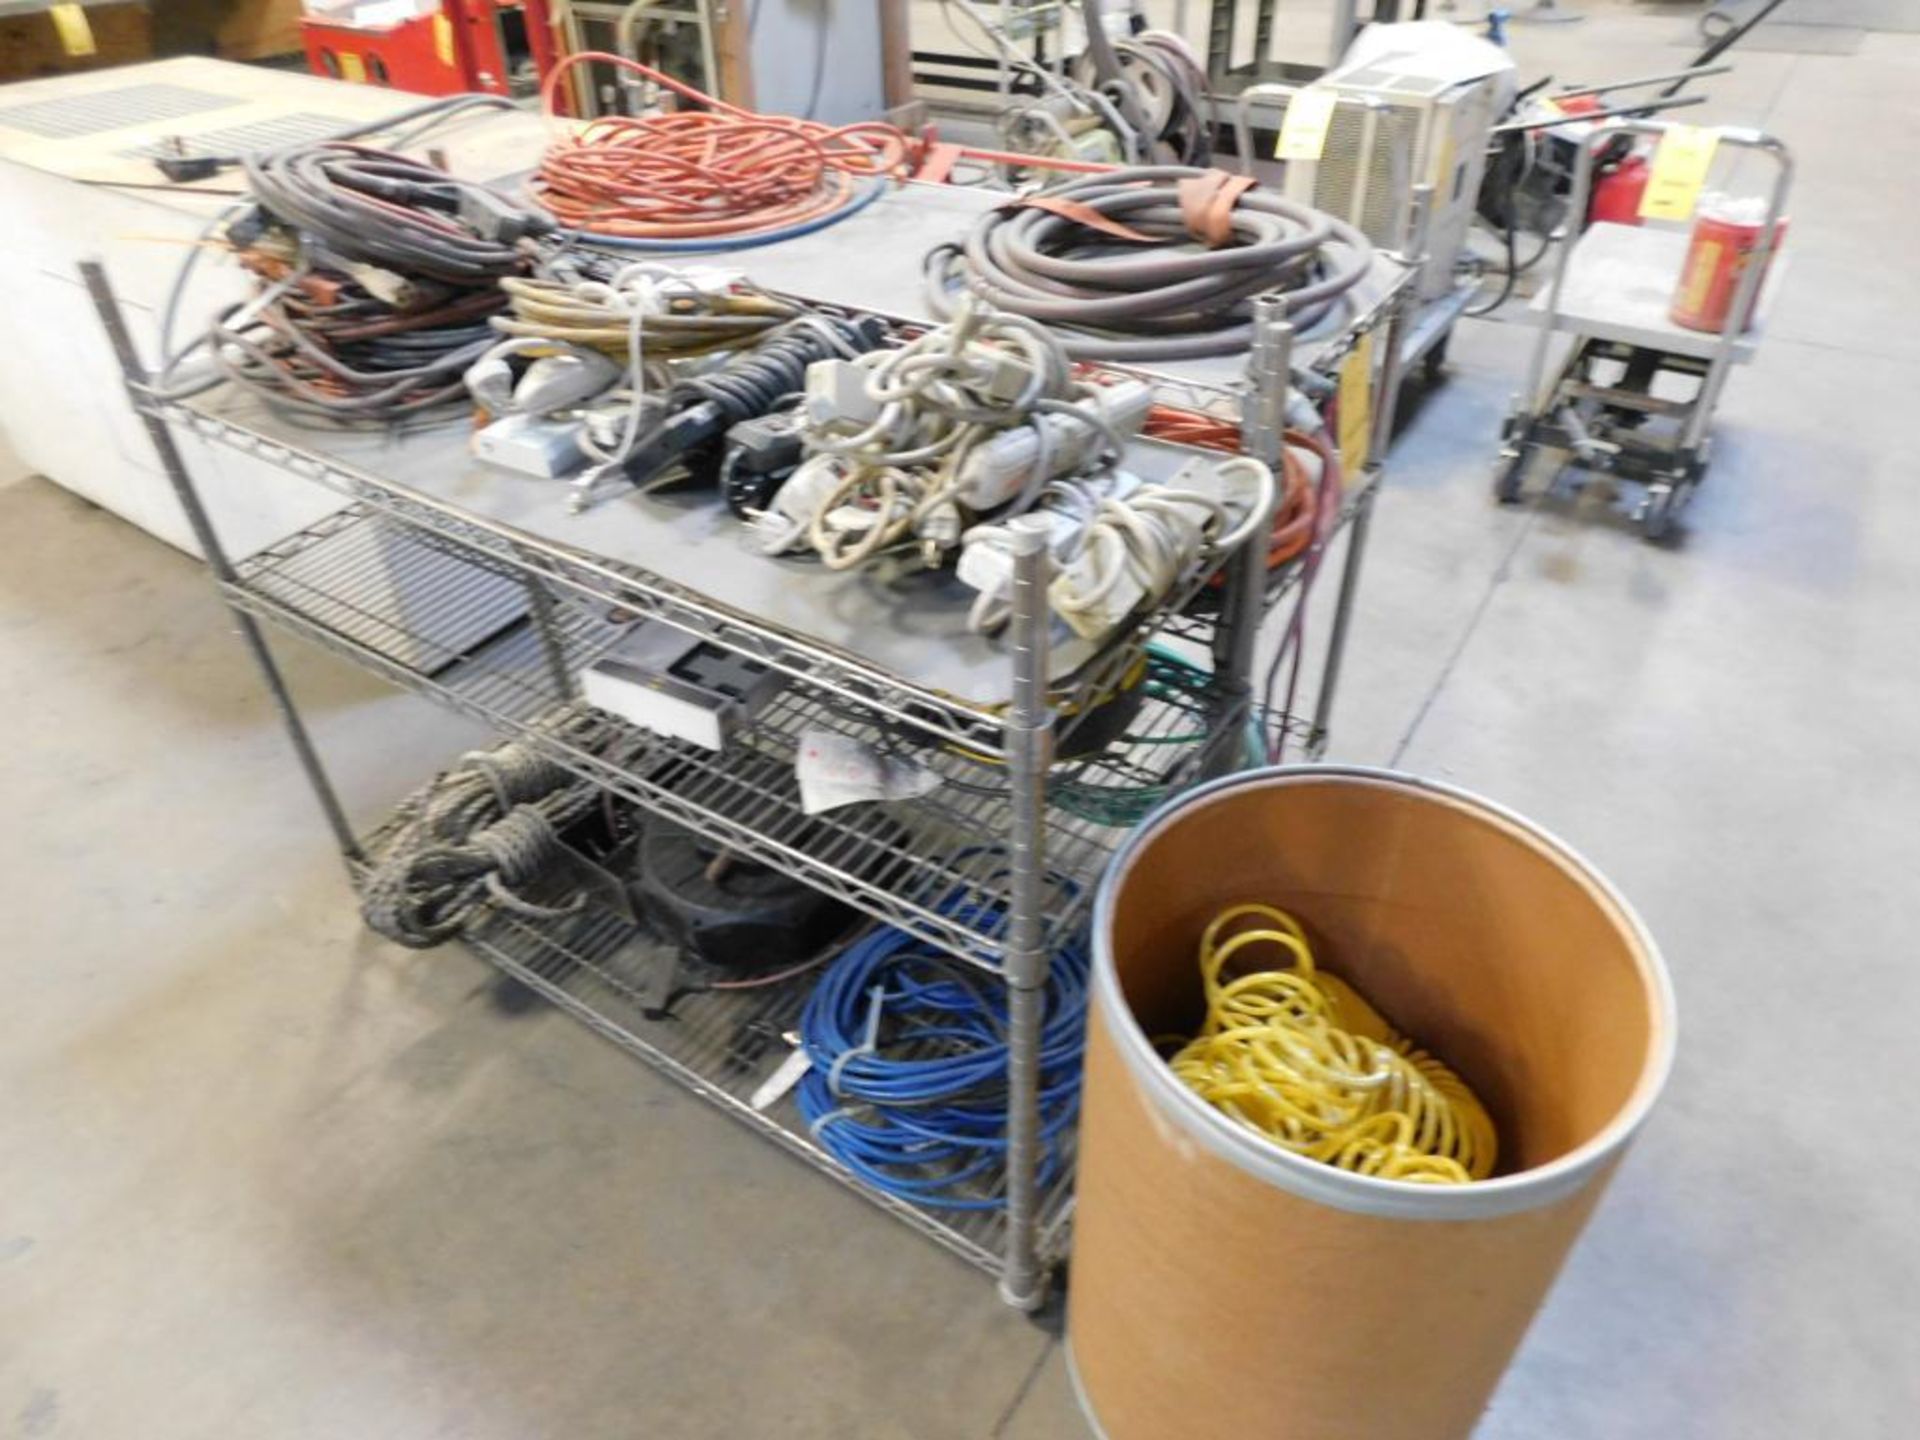 LOT: (2) Portable Shelves with Contents including Extension Cords, Power Strips, Air Hoses, Rope, - Image 2 of 2